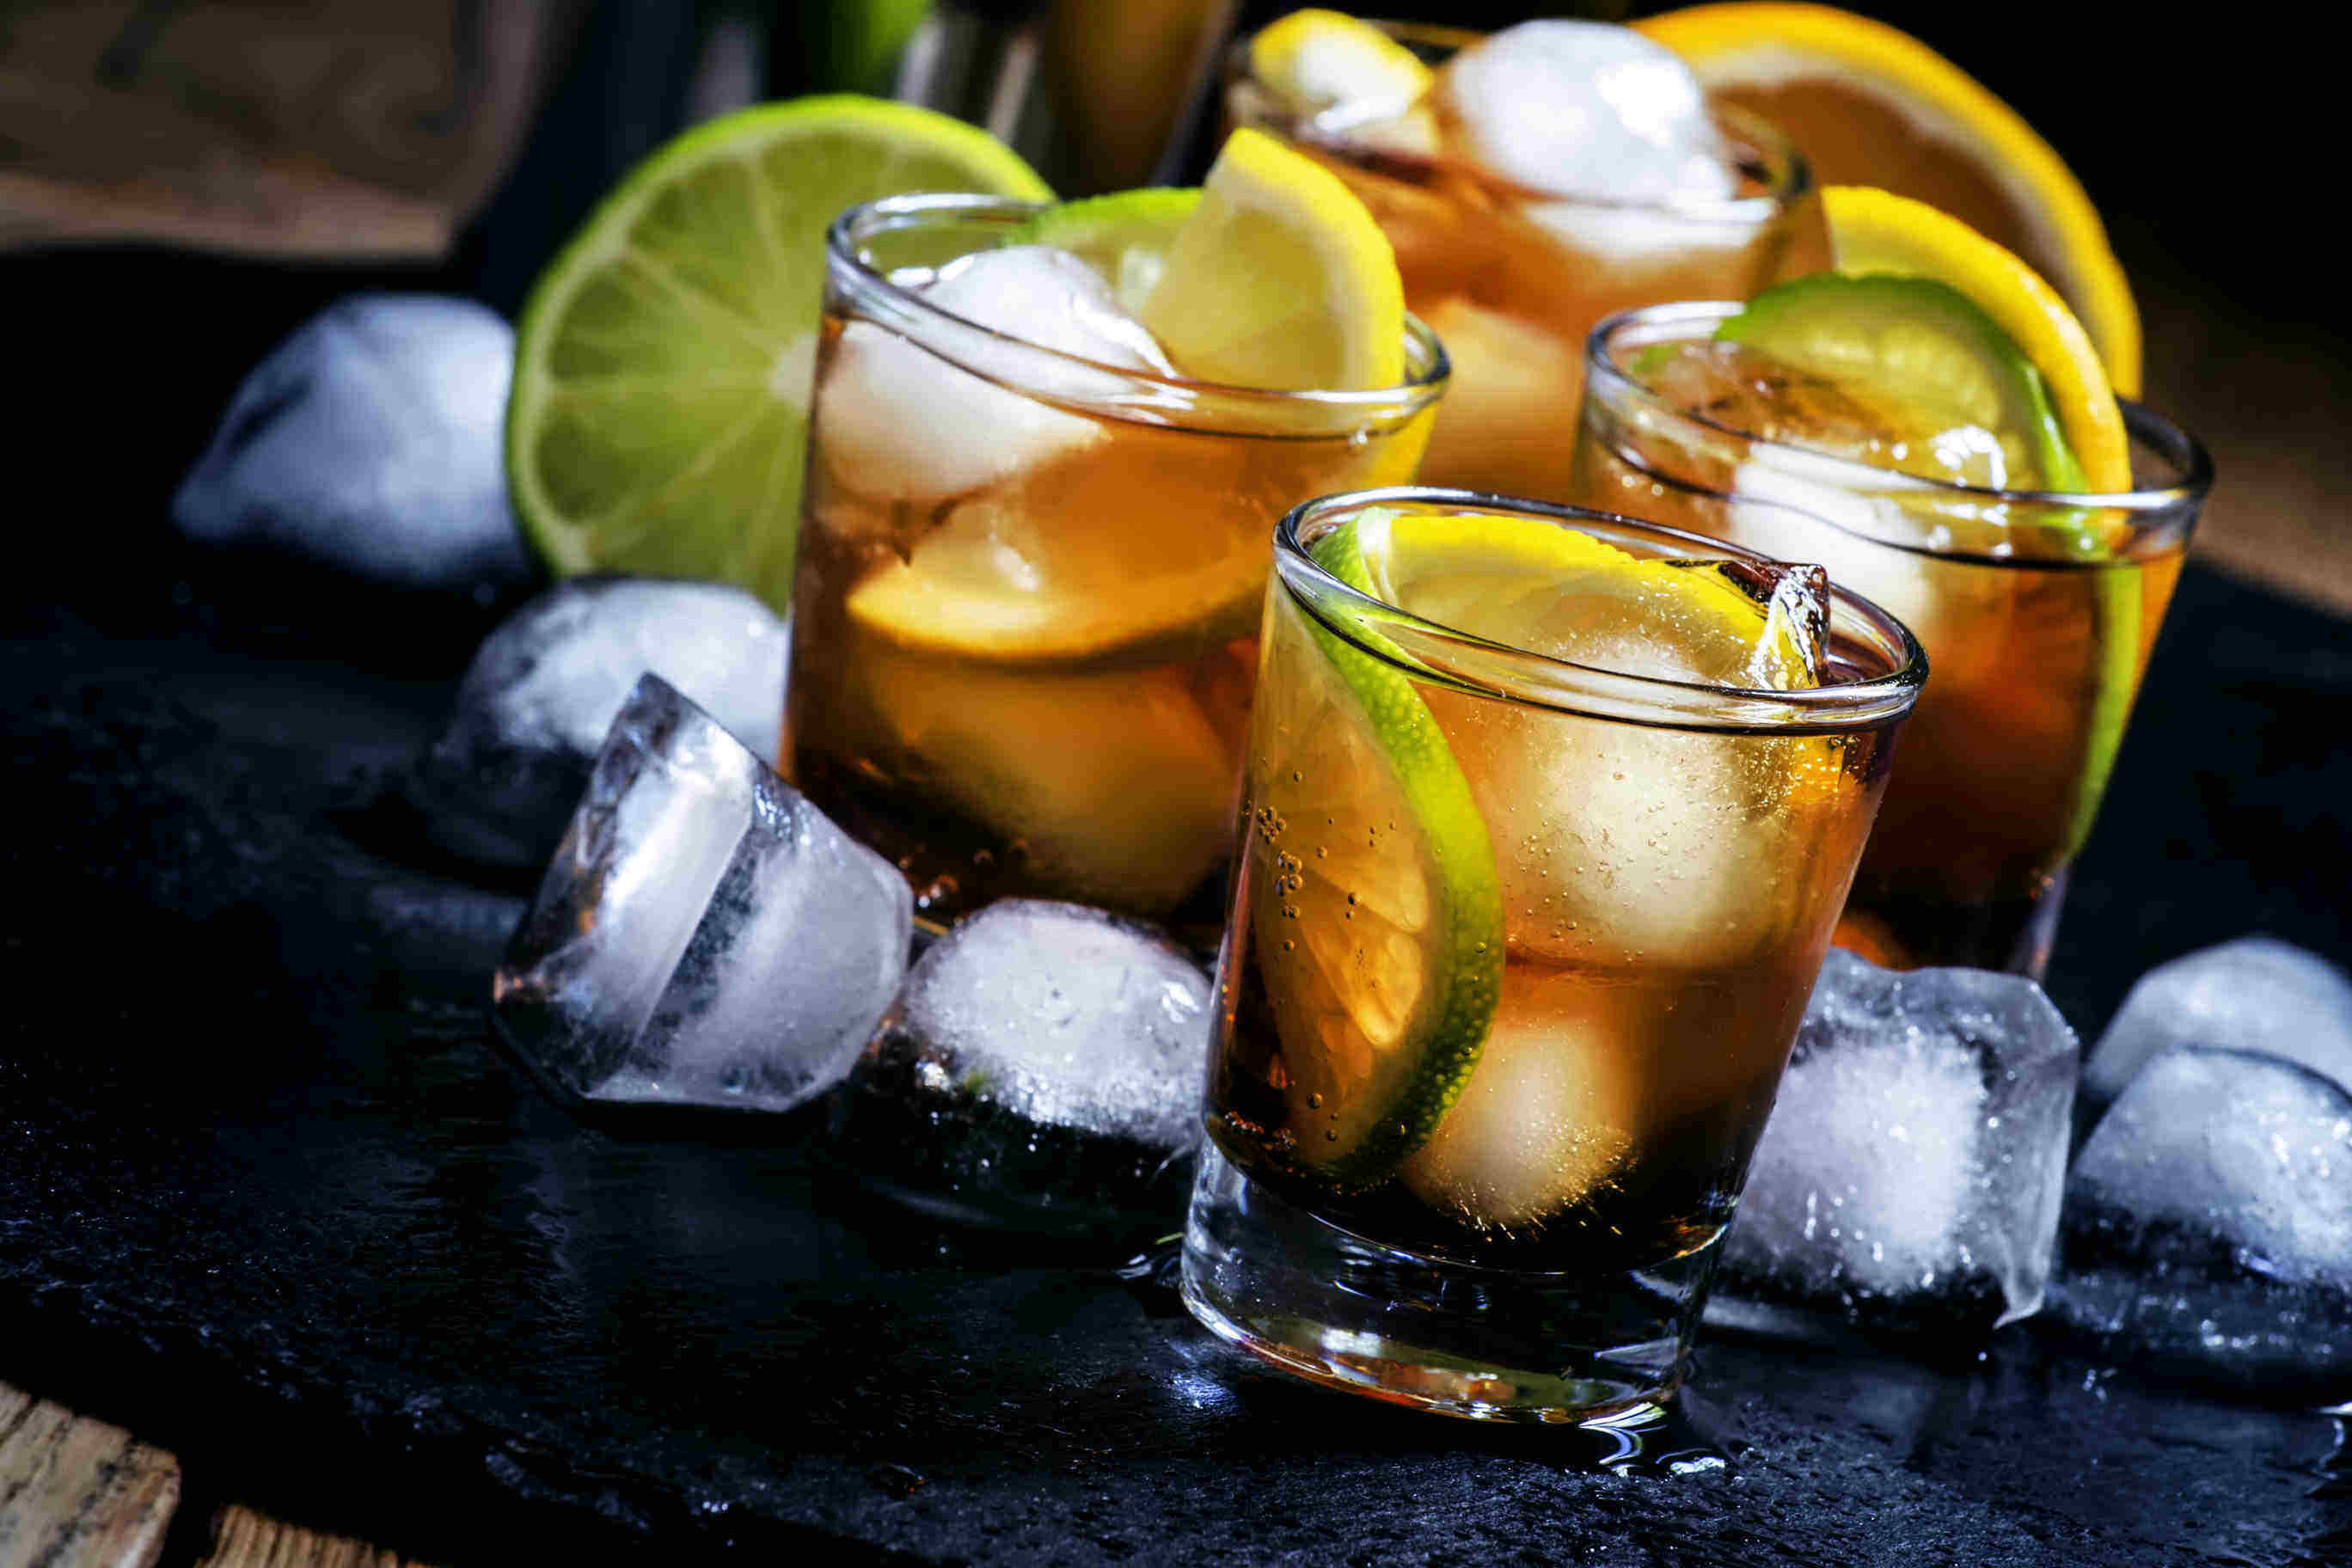 With over 60% of rum’s total market value being sold via the on-trade, rum has proved a pretty consistent seller for bars and pubs around the country.